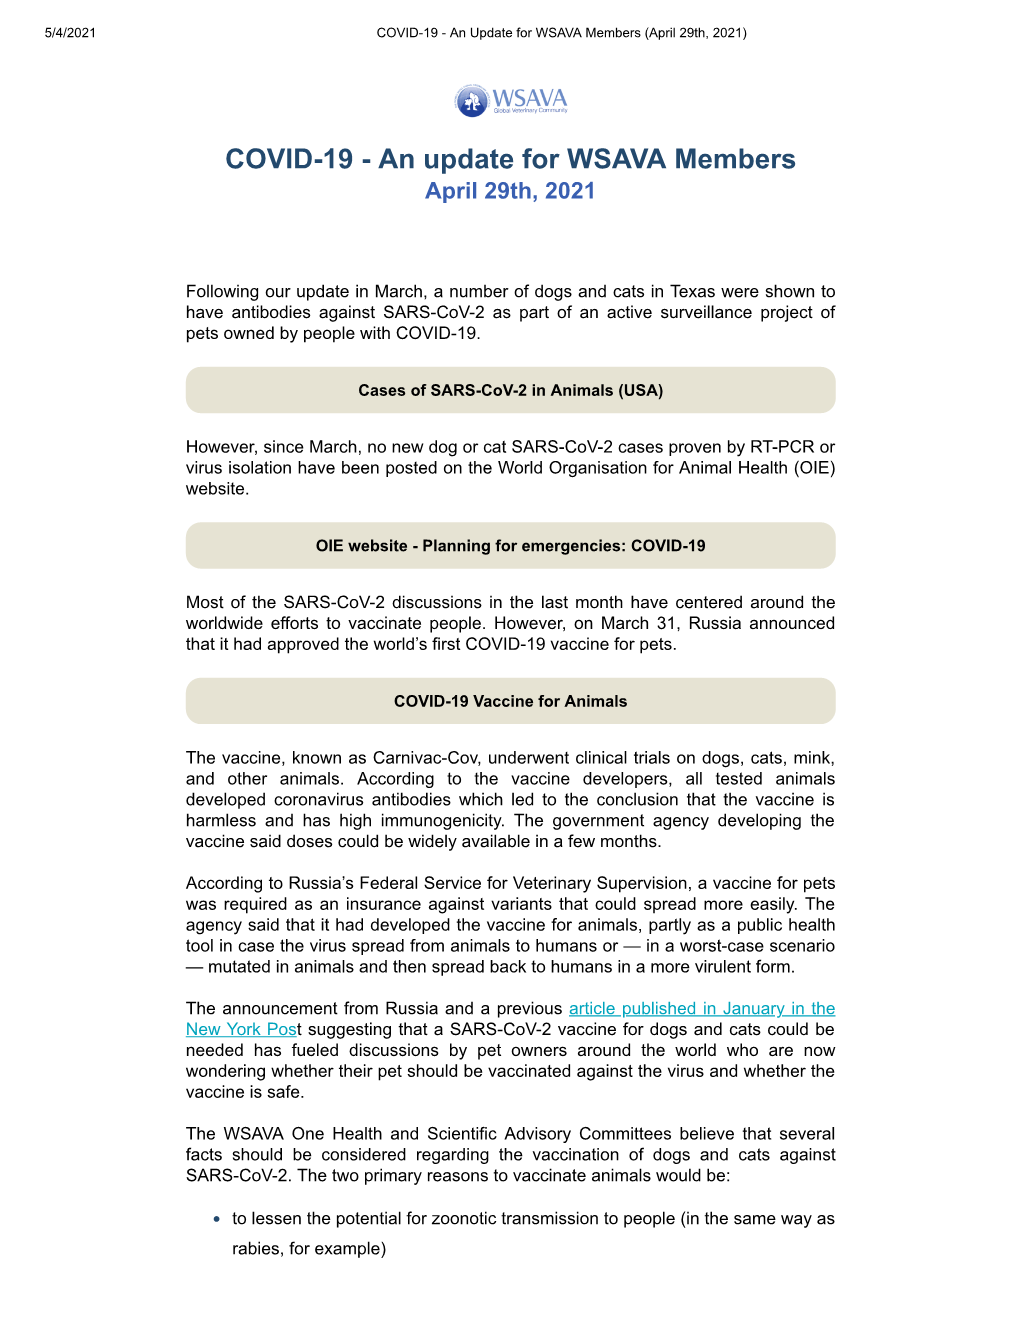 COVID-19 - an Update for WSAVA Members (April 29Th, 2021)